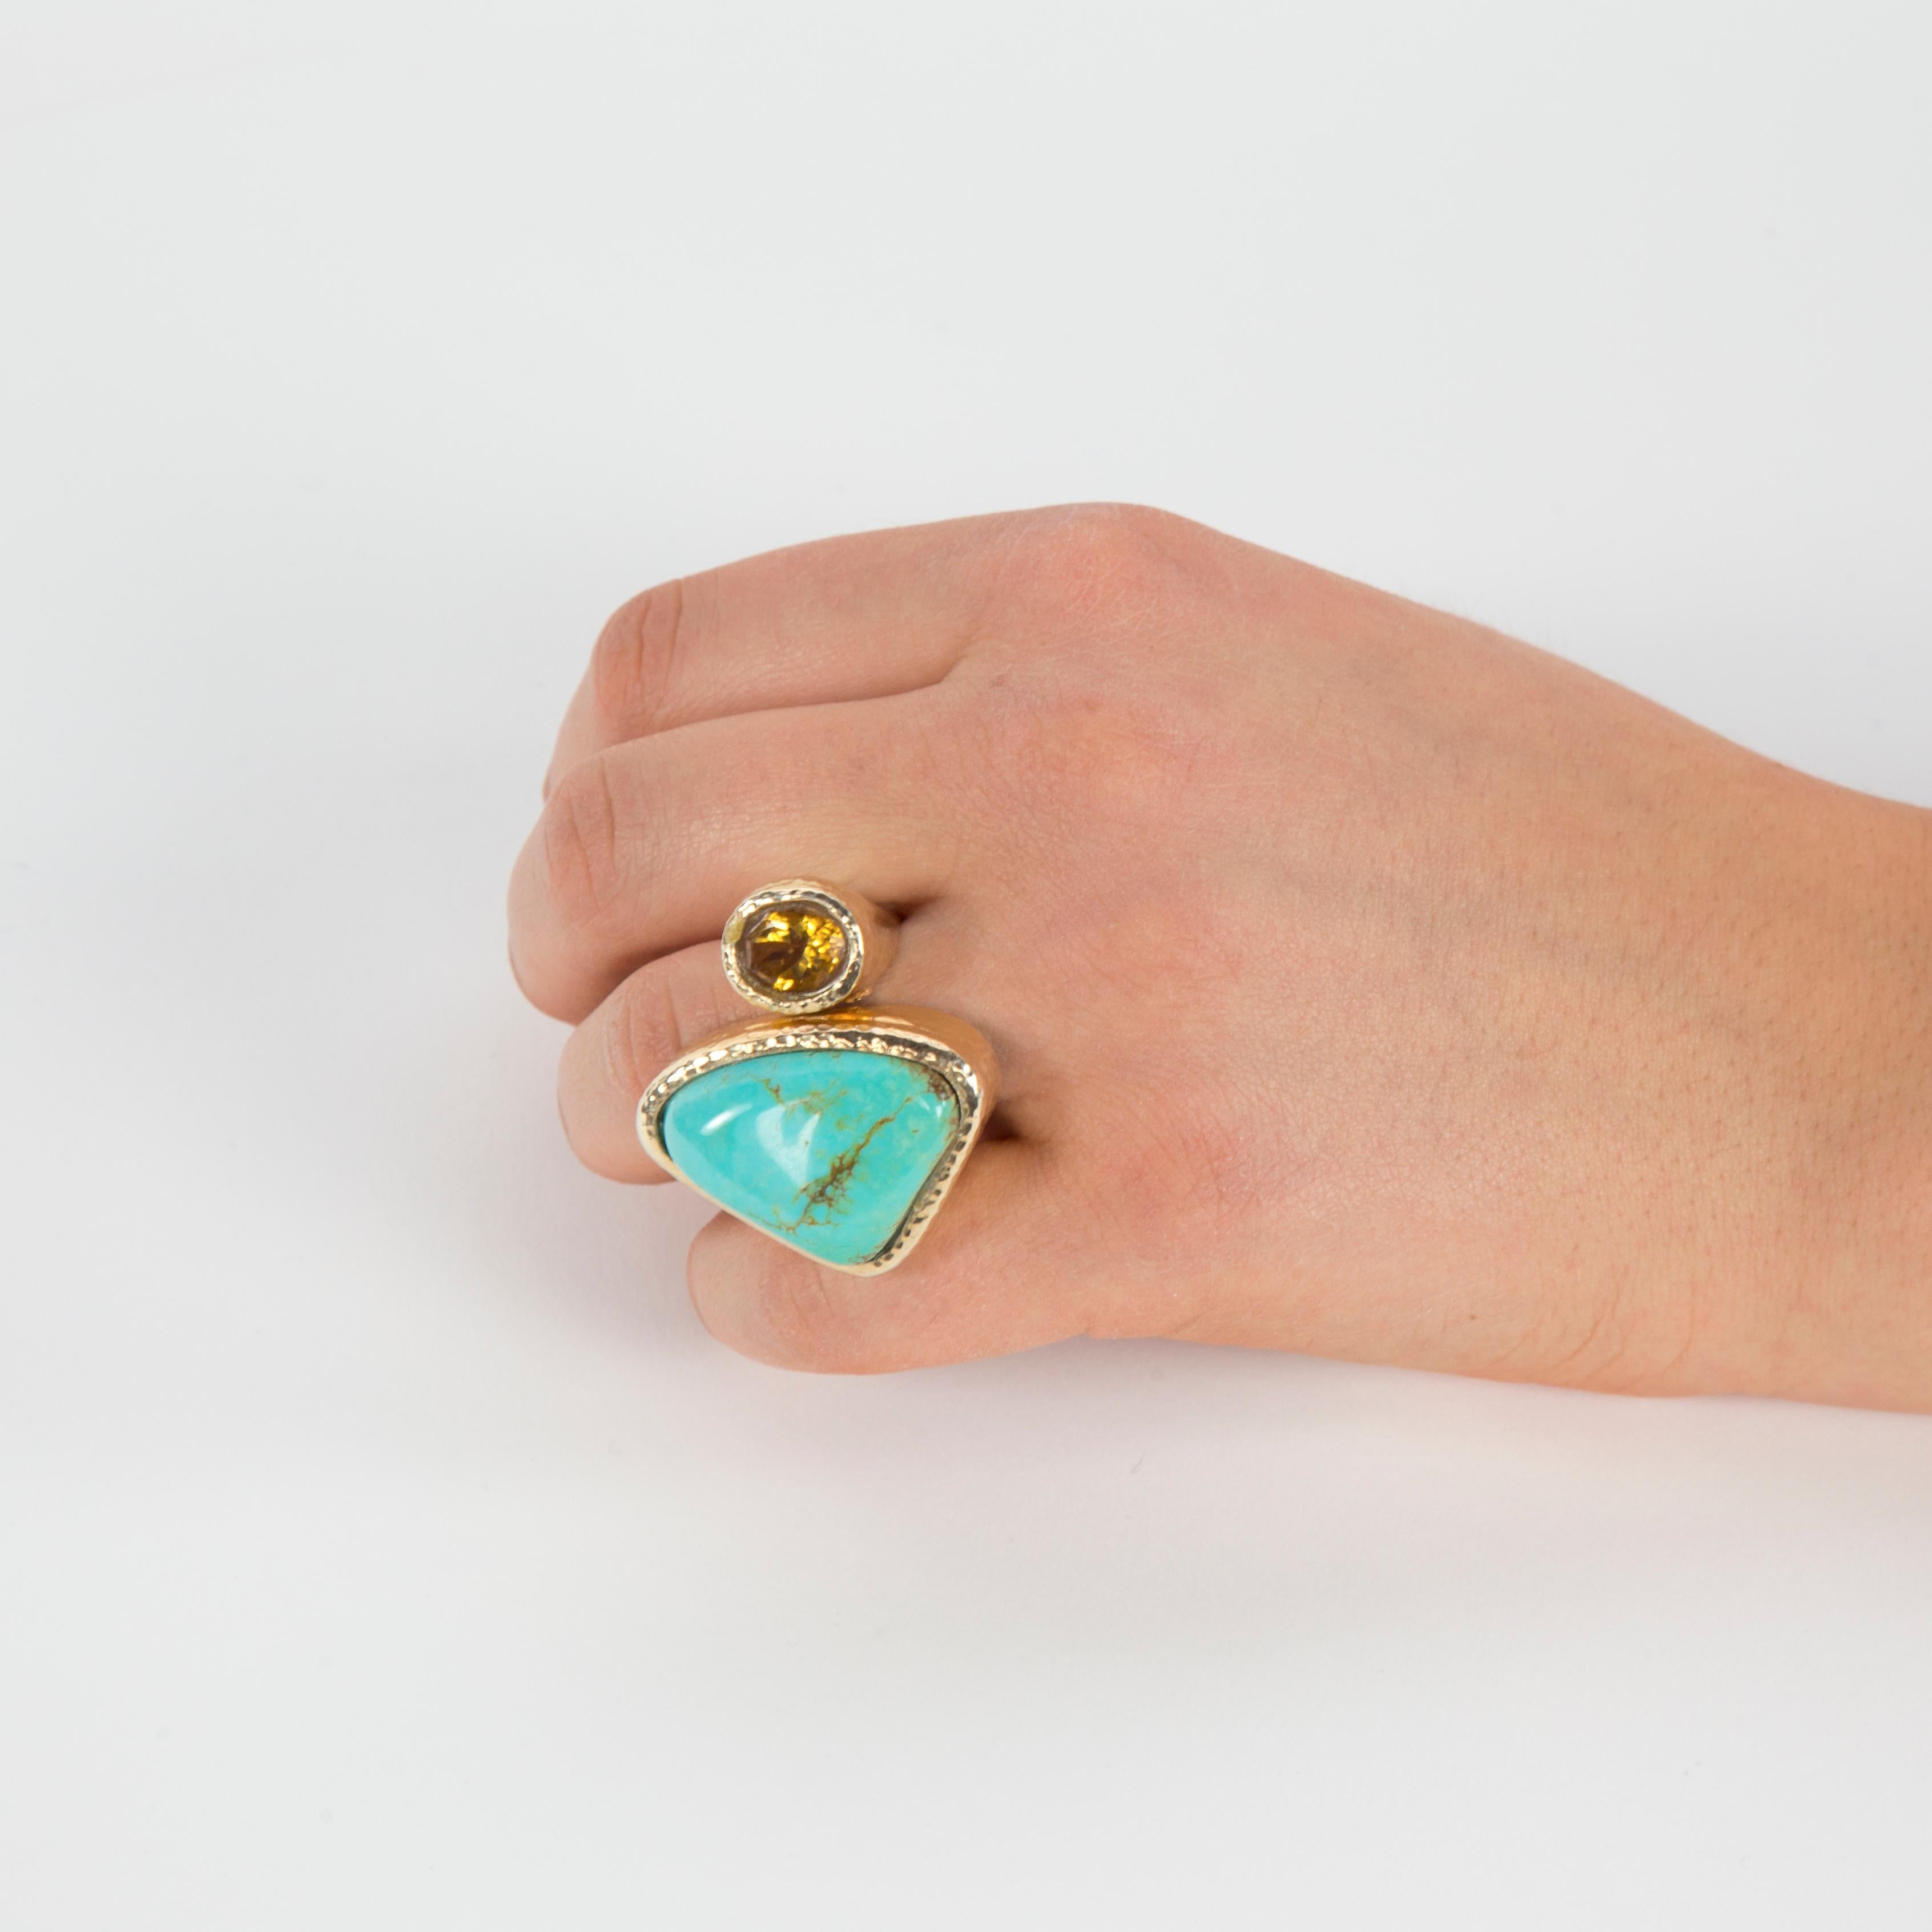 Women's Outstanding 45 Carat Turquoise and Citrine Gilt Sterling Silver Statement Ring